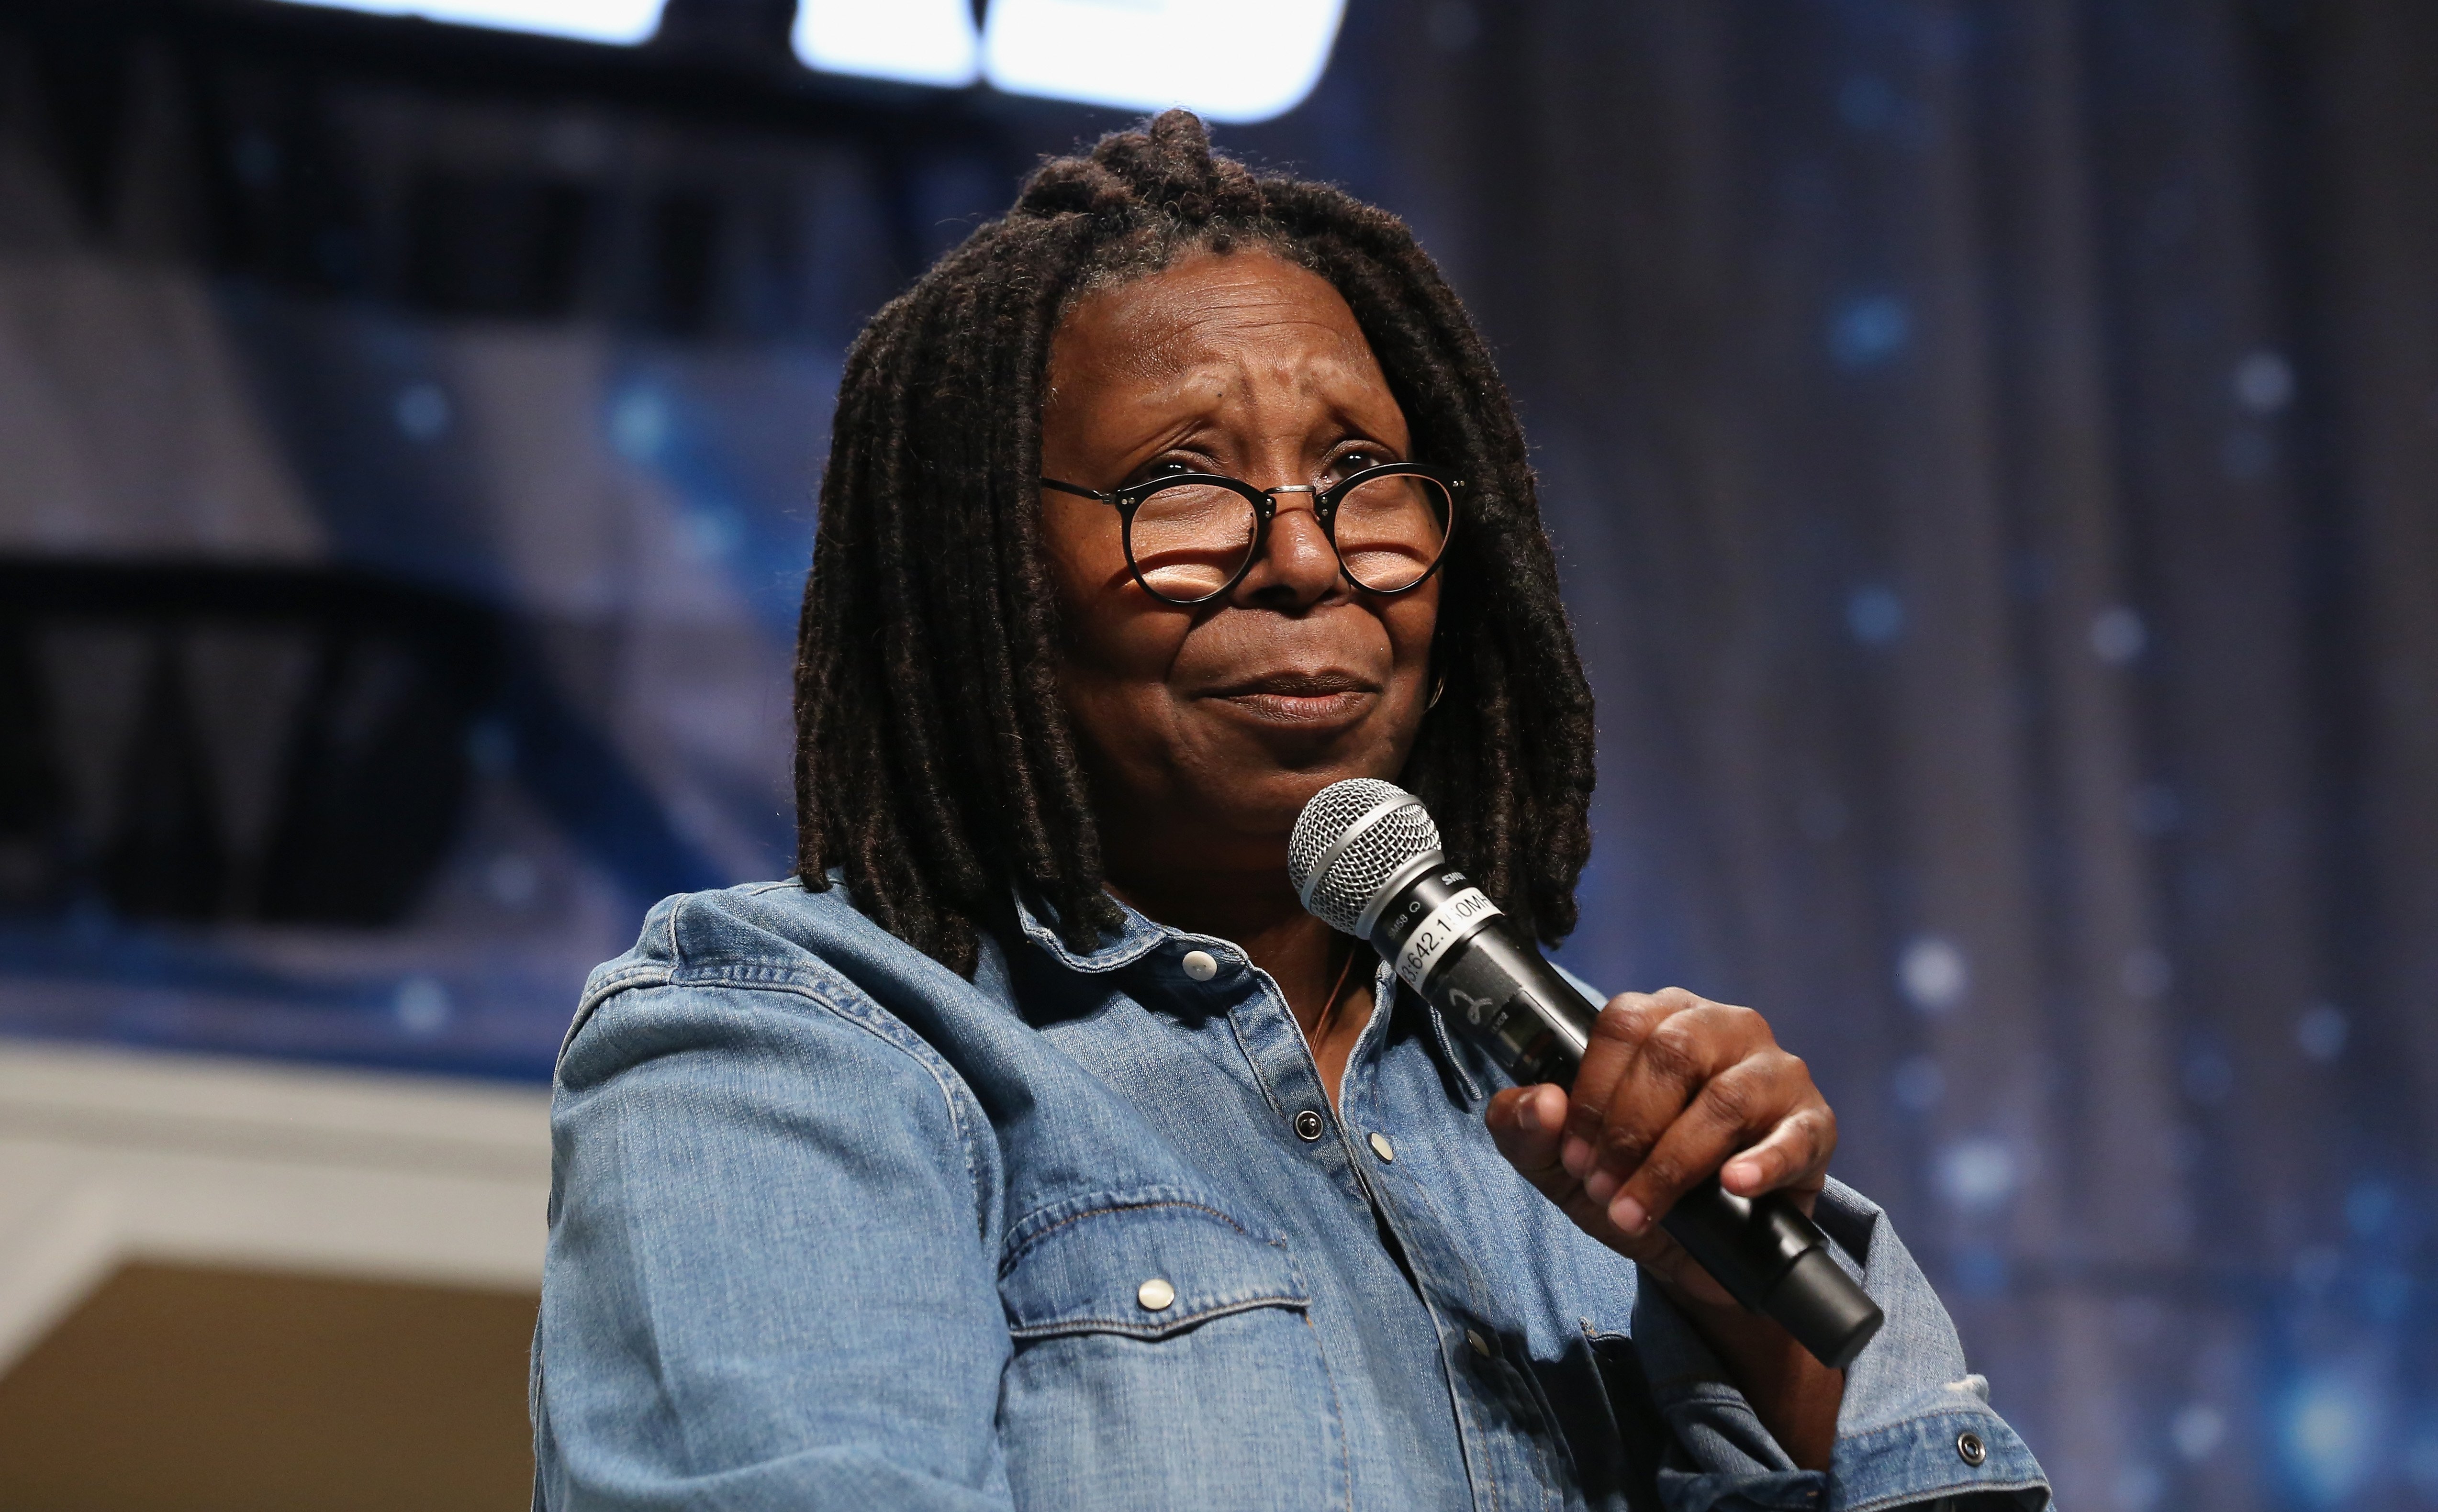 Whoopi Goldberg at the 15th annual official Star Trek convention on Aug. 4, 2016 in Las Vegas, Nevada | Photo: Getty Images